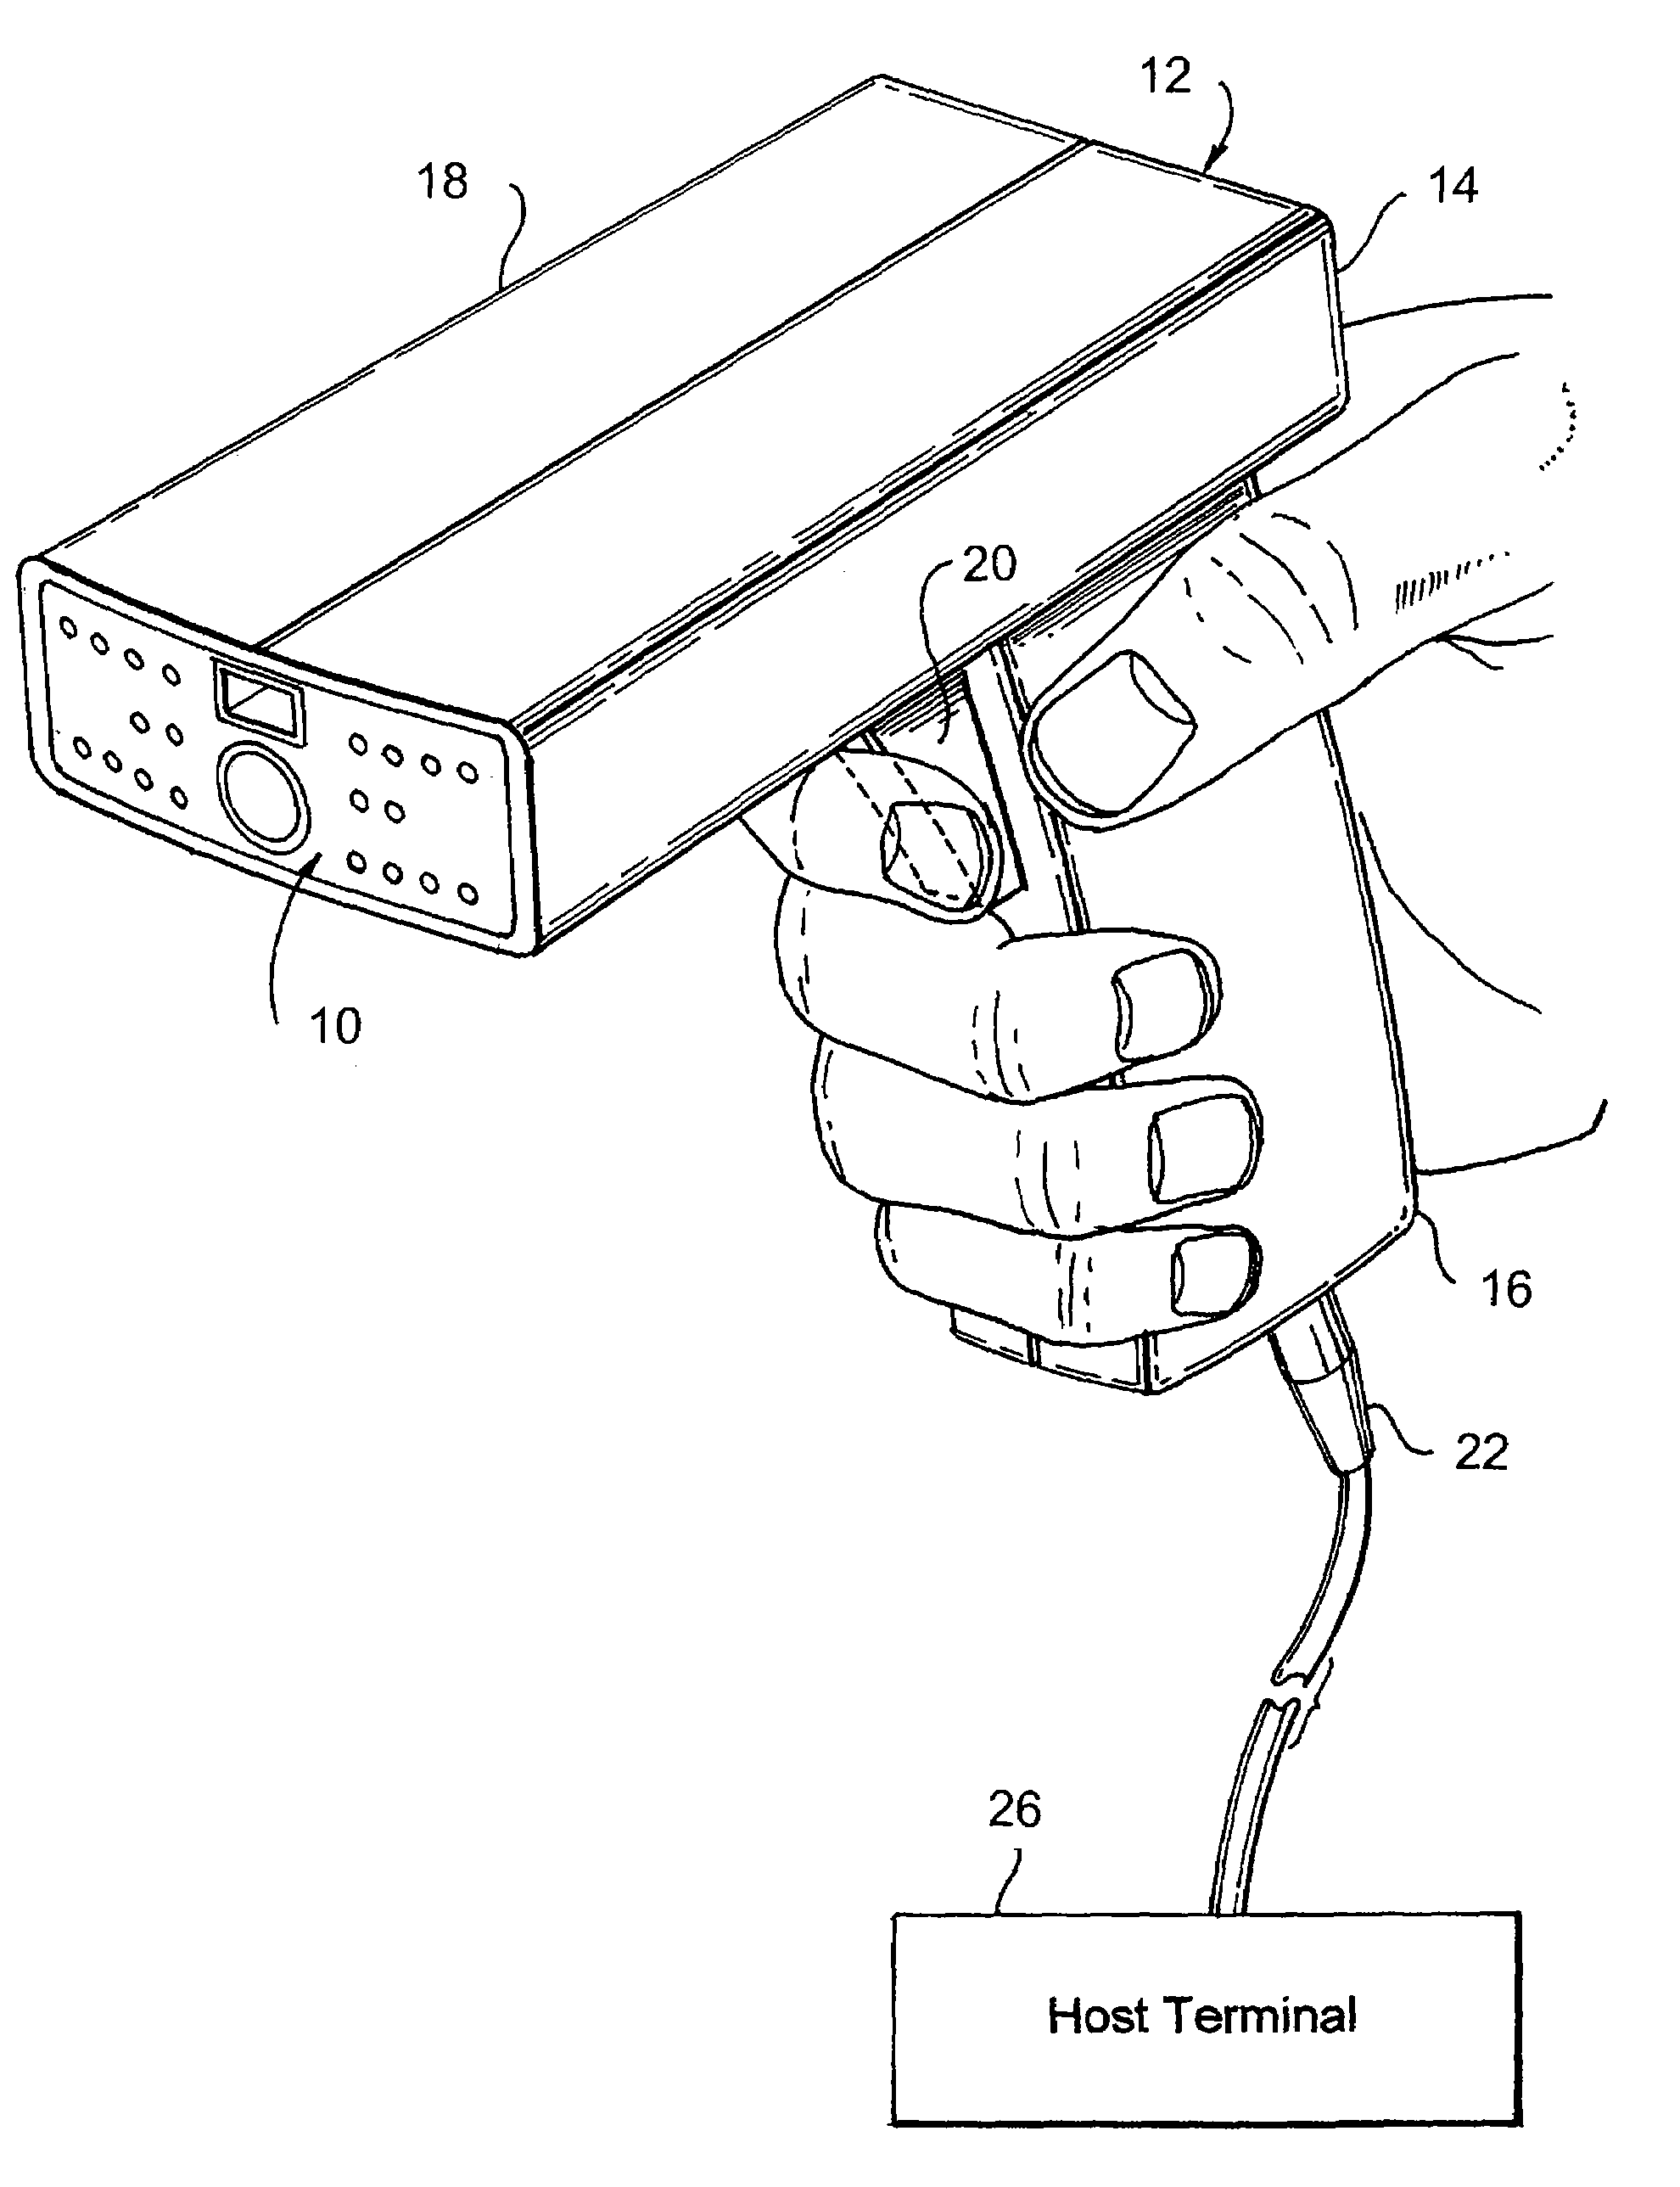 System and method for auto focusing an optical code reader